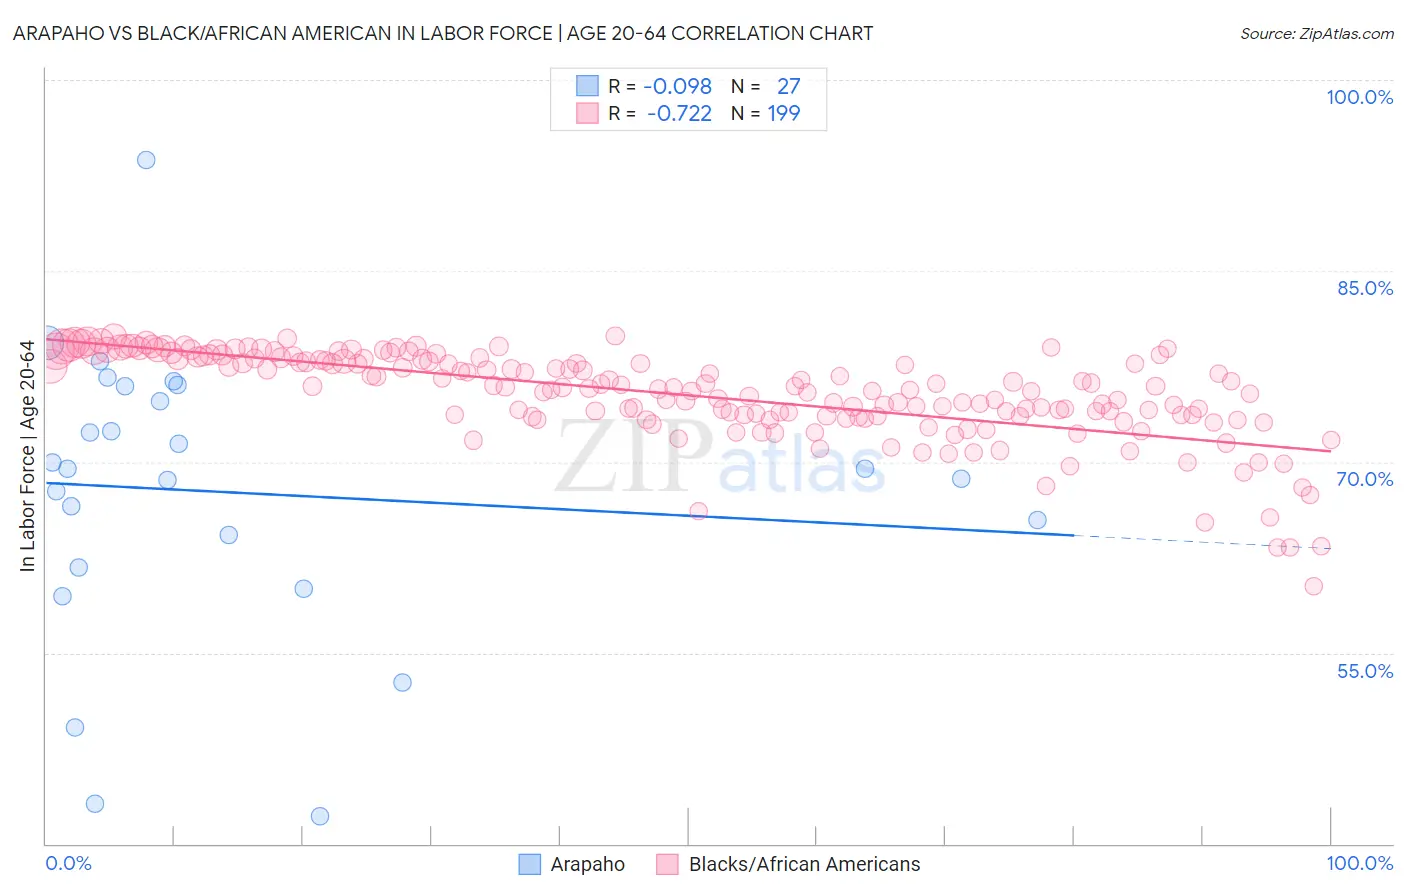 Arapaho vs Black/African American In Labor Force | Age 20-64